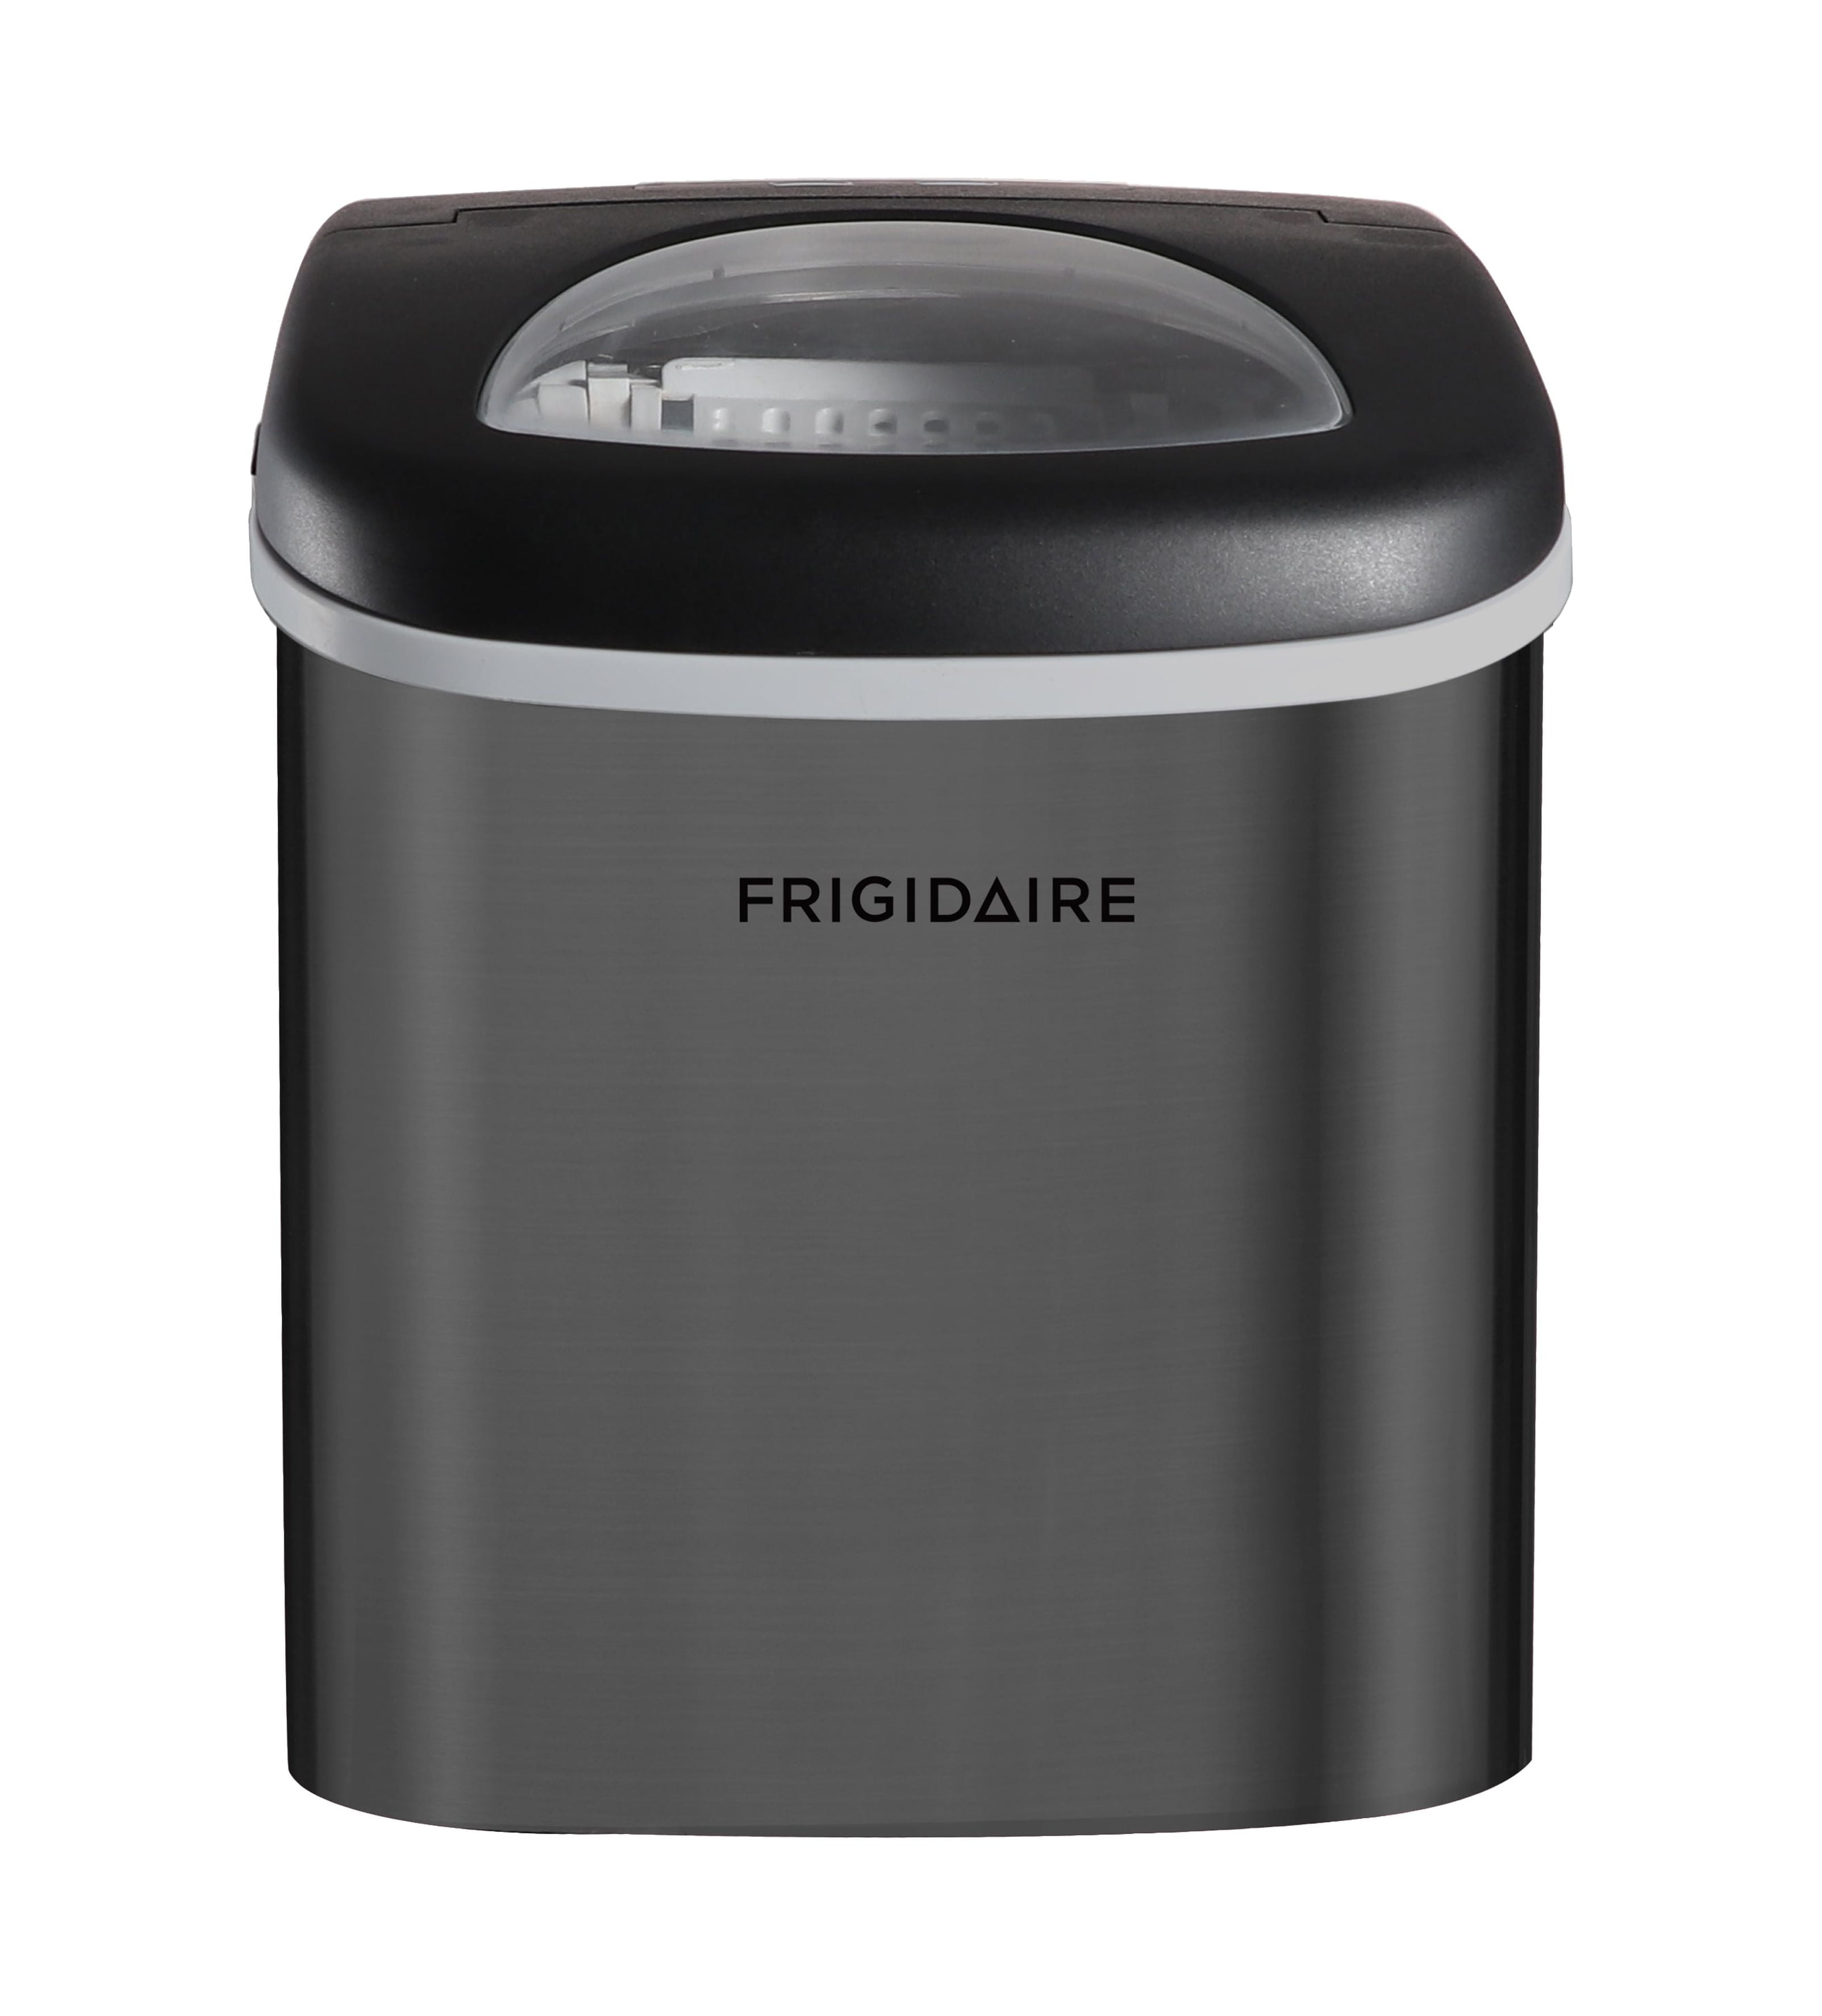  FRIGIDAIRE - Stainless Steel Countertop Ice Maker